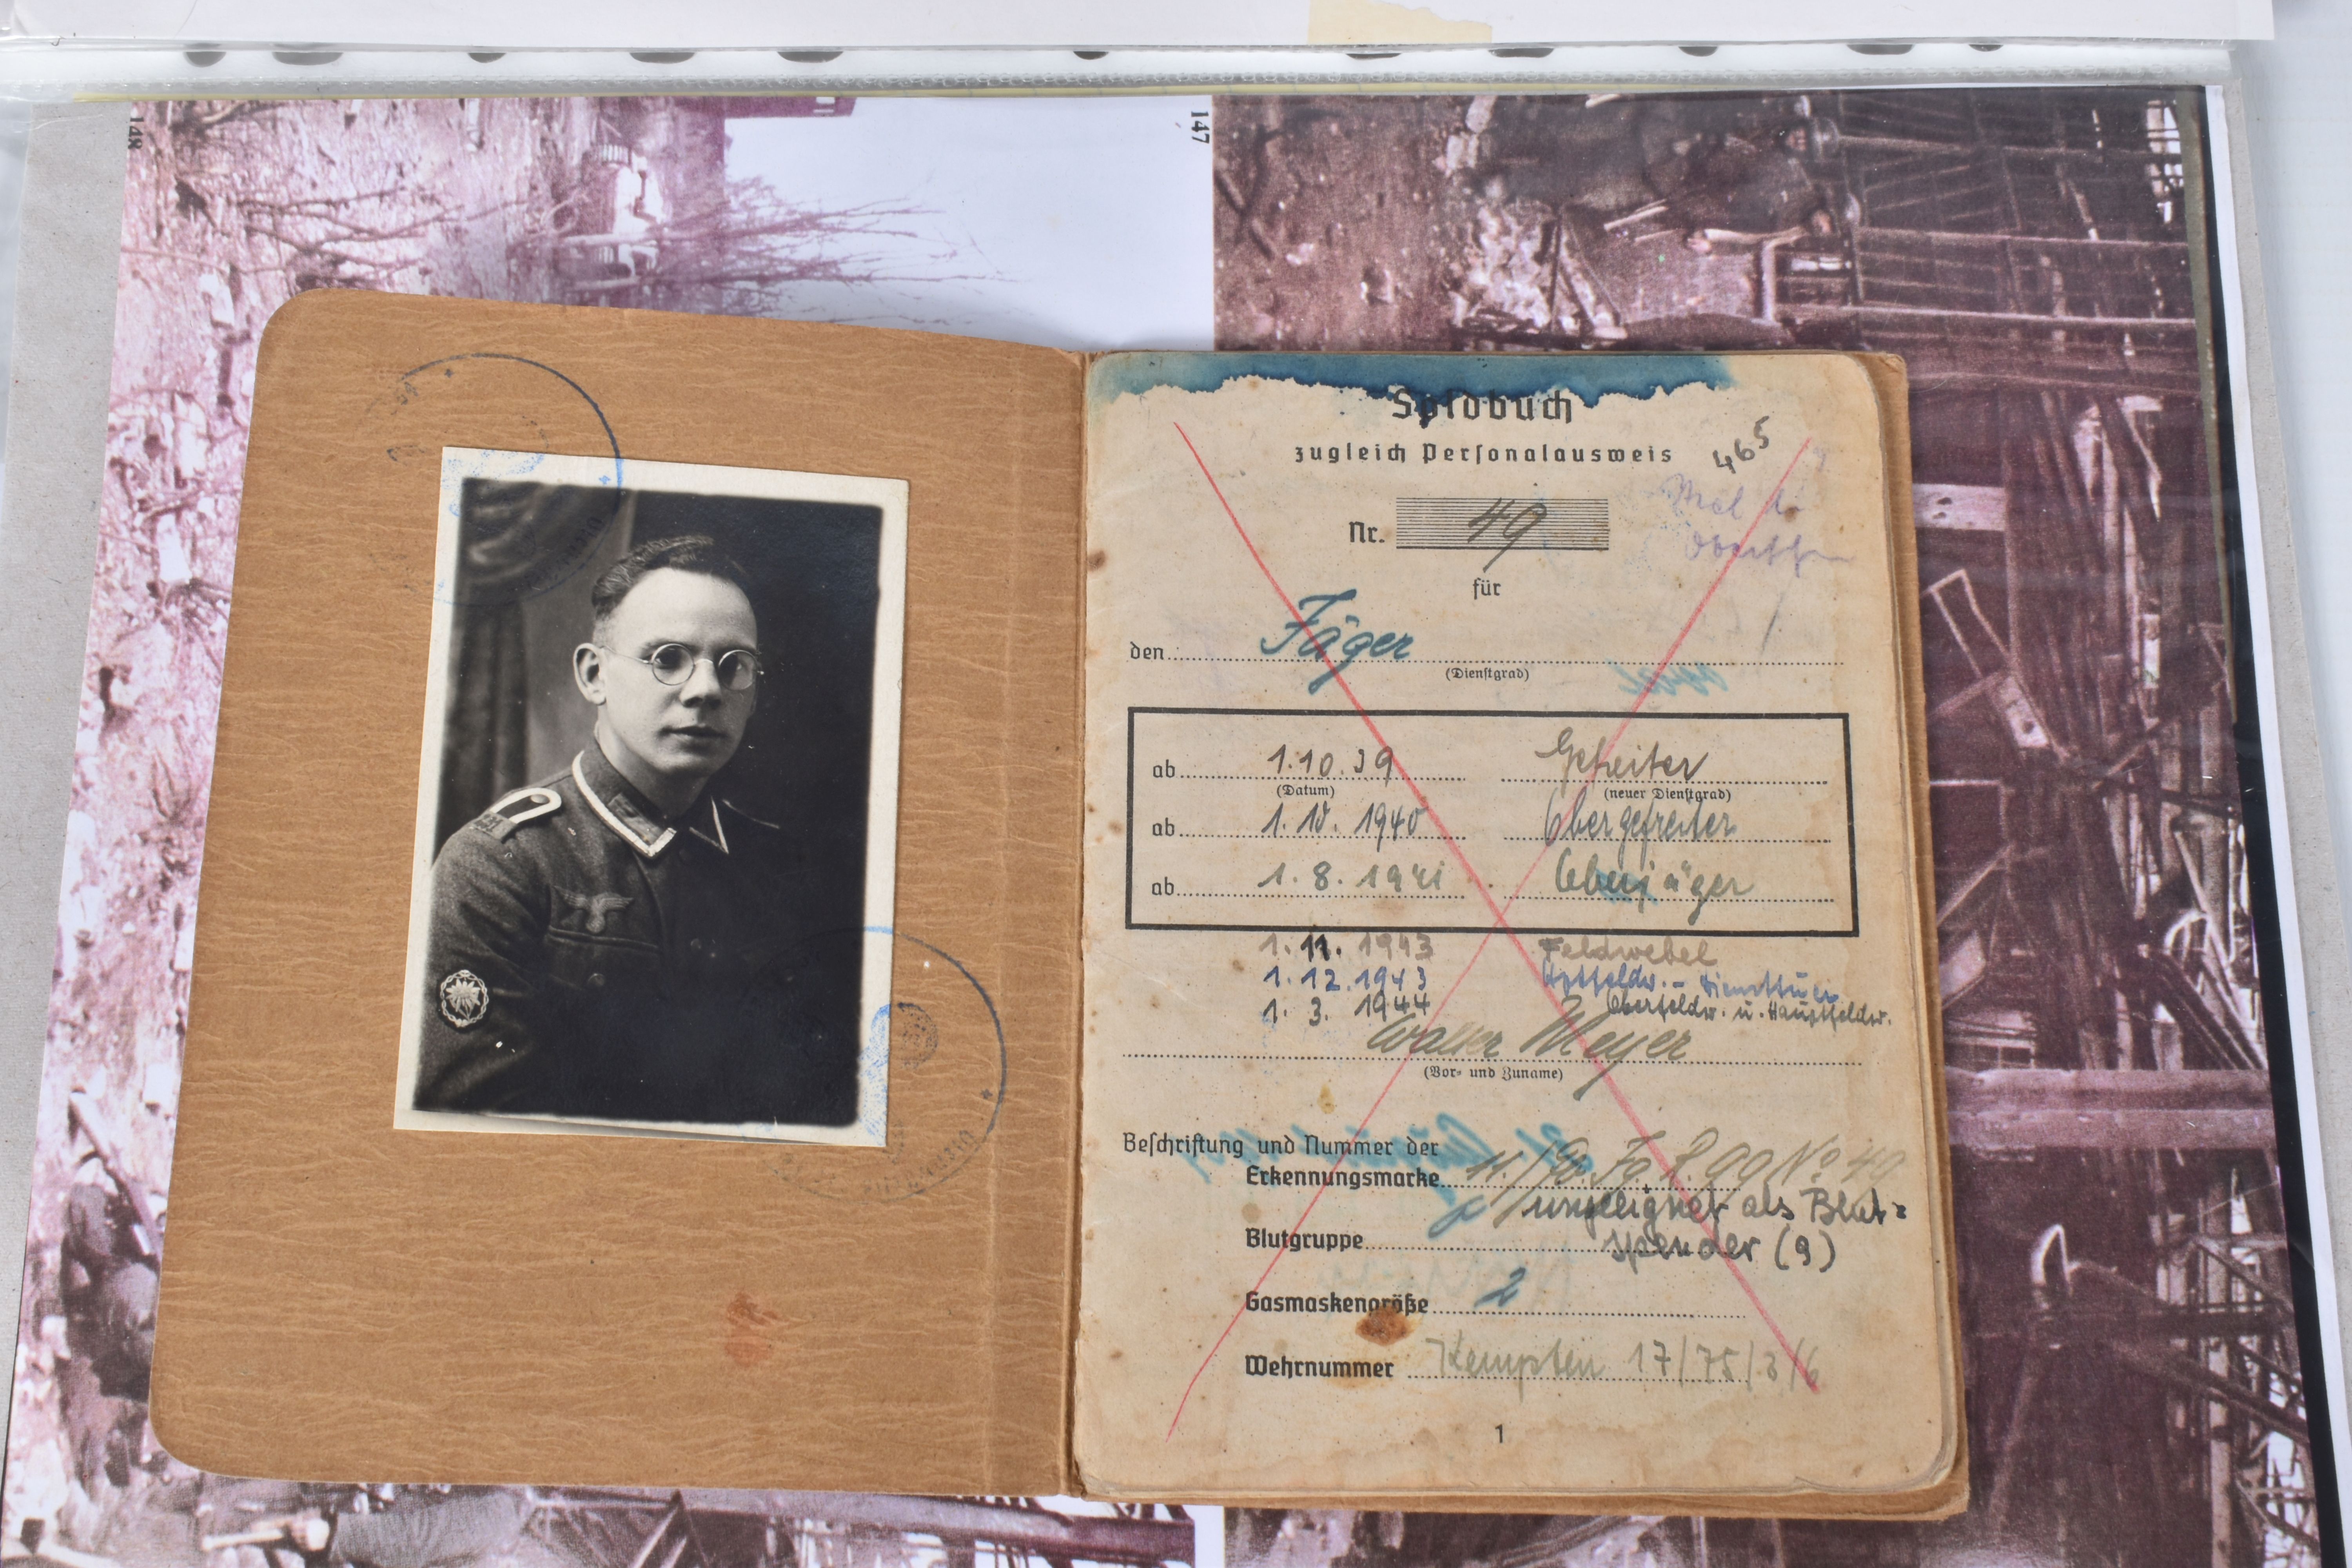 WALTER MEYER, SERGEANT, INCLUDES SOLDBUCH, photos, maps, and articles, red X through the Soldbuch - Image 15 of 24